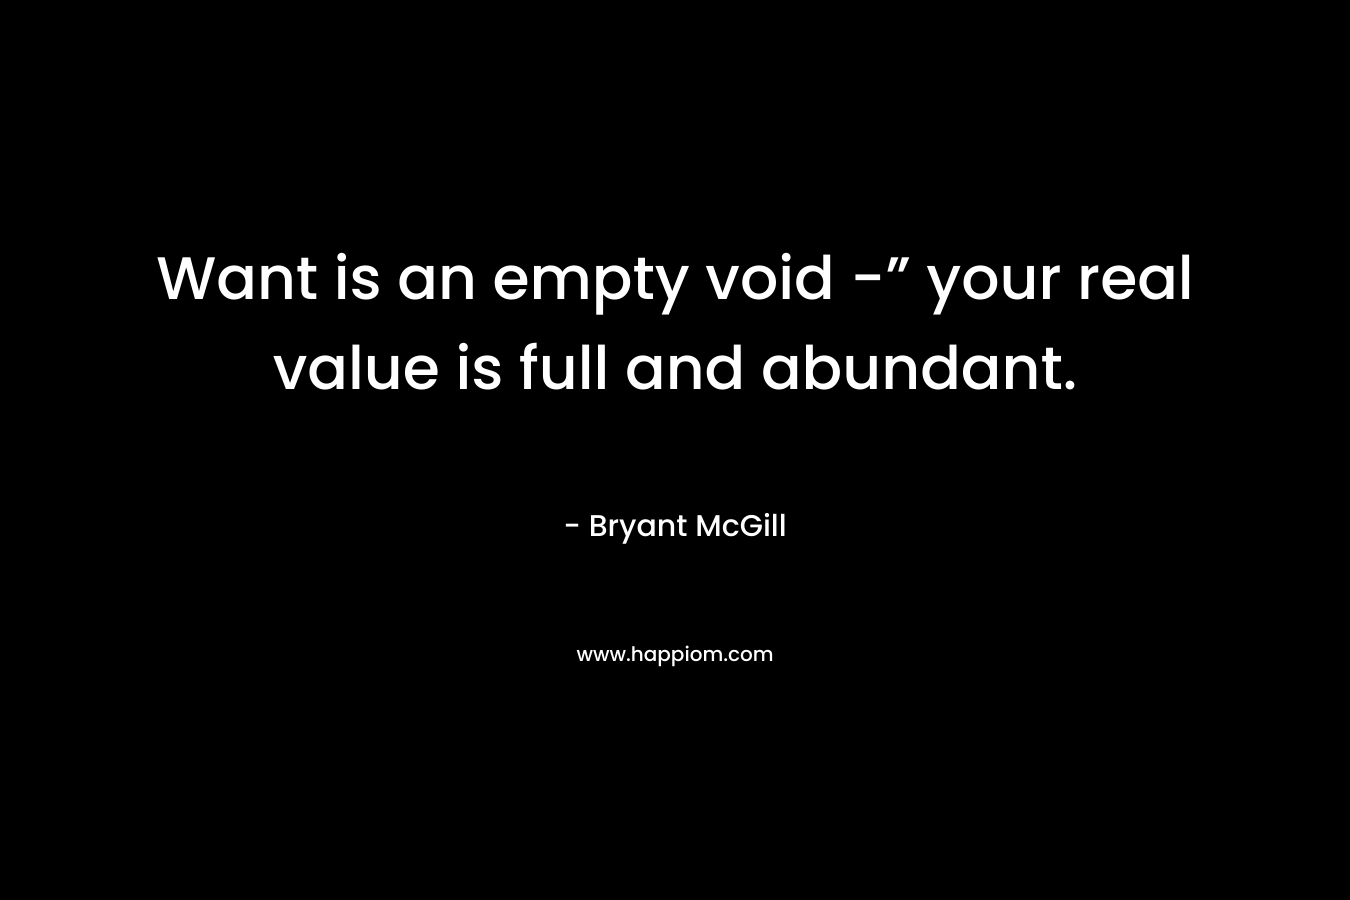 Want is an empty void -” your real value is full and abundant. – Bryant McGill